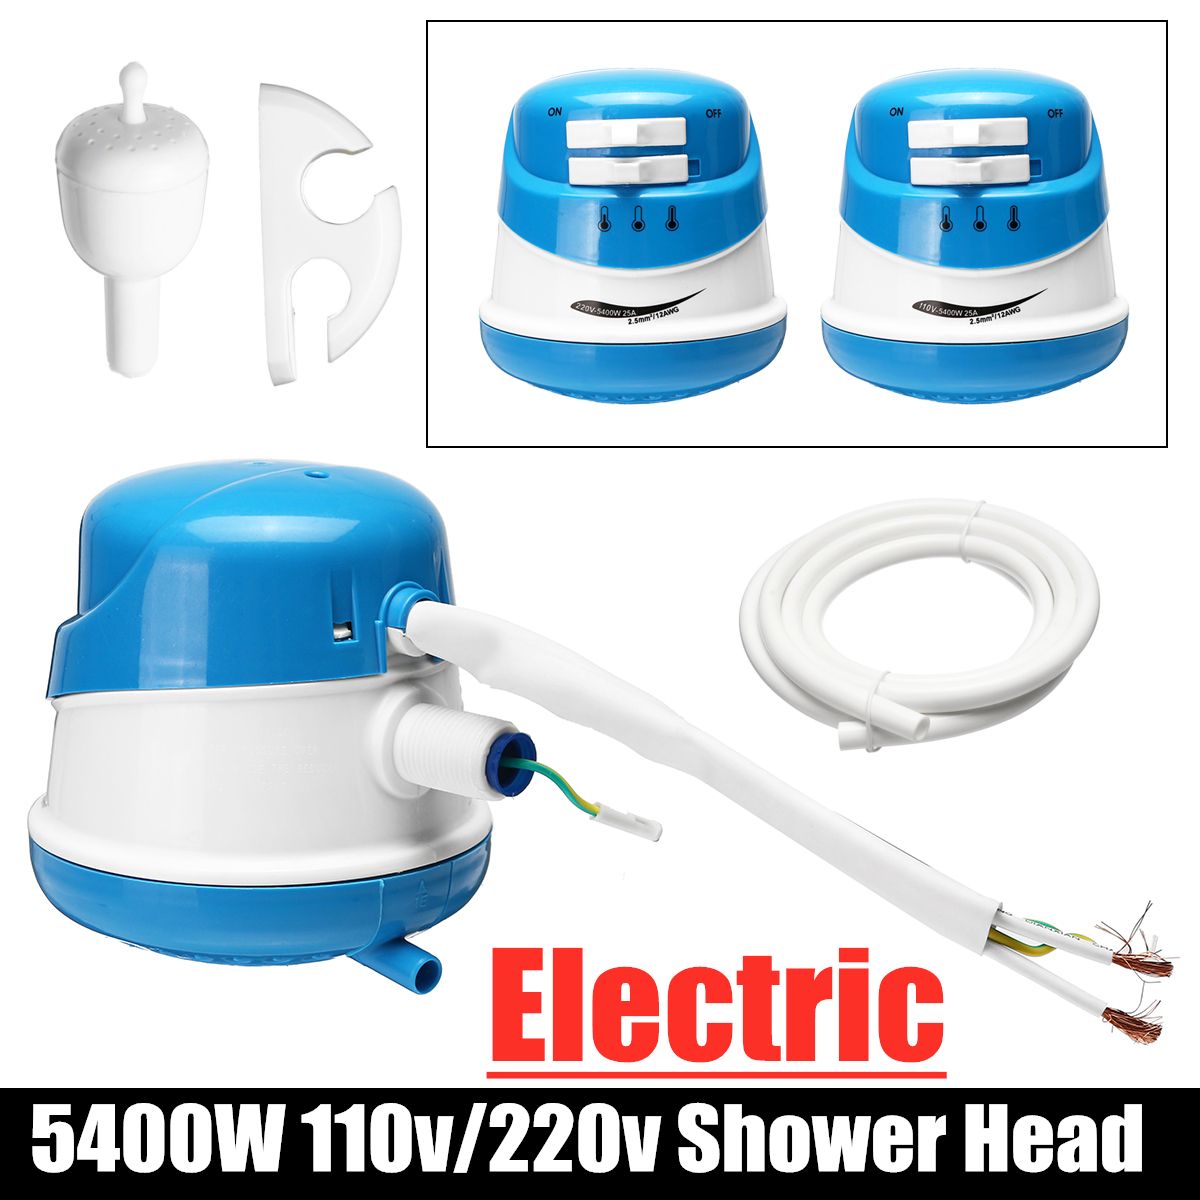 5400W-110220V-Electric-Shower-Head-Tankless-Instant-Hot-Water-Heater-Bath-Kits-1394622